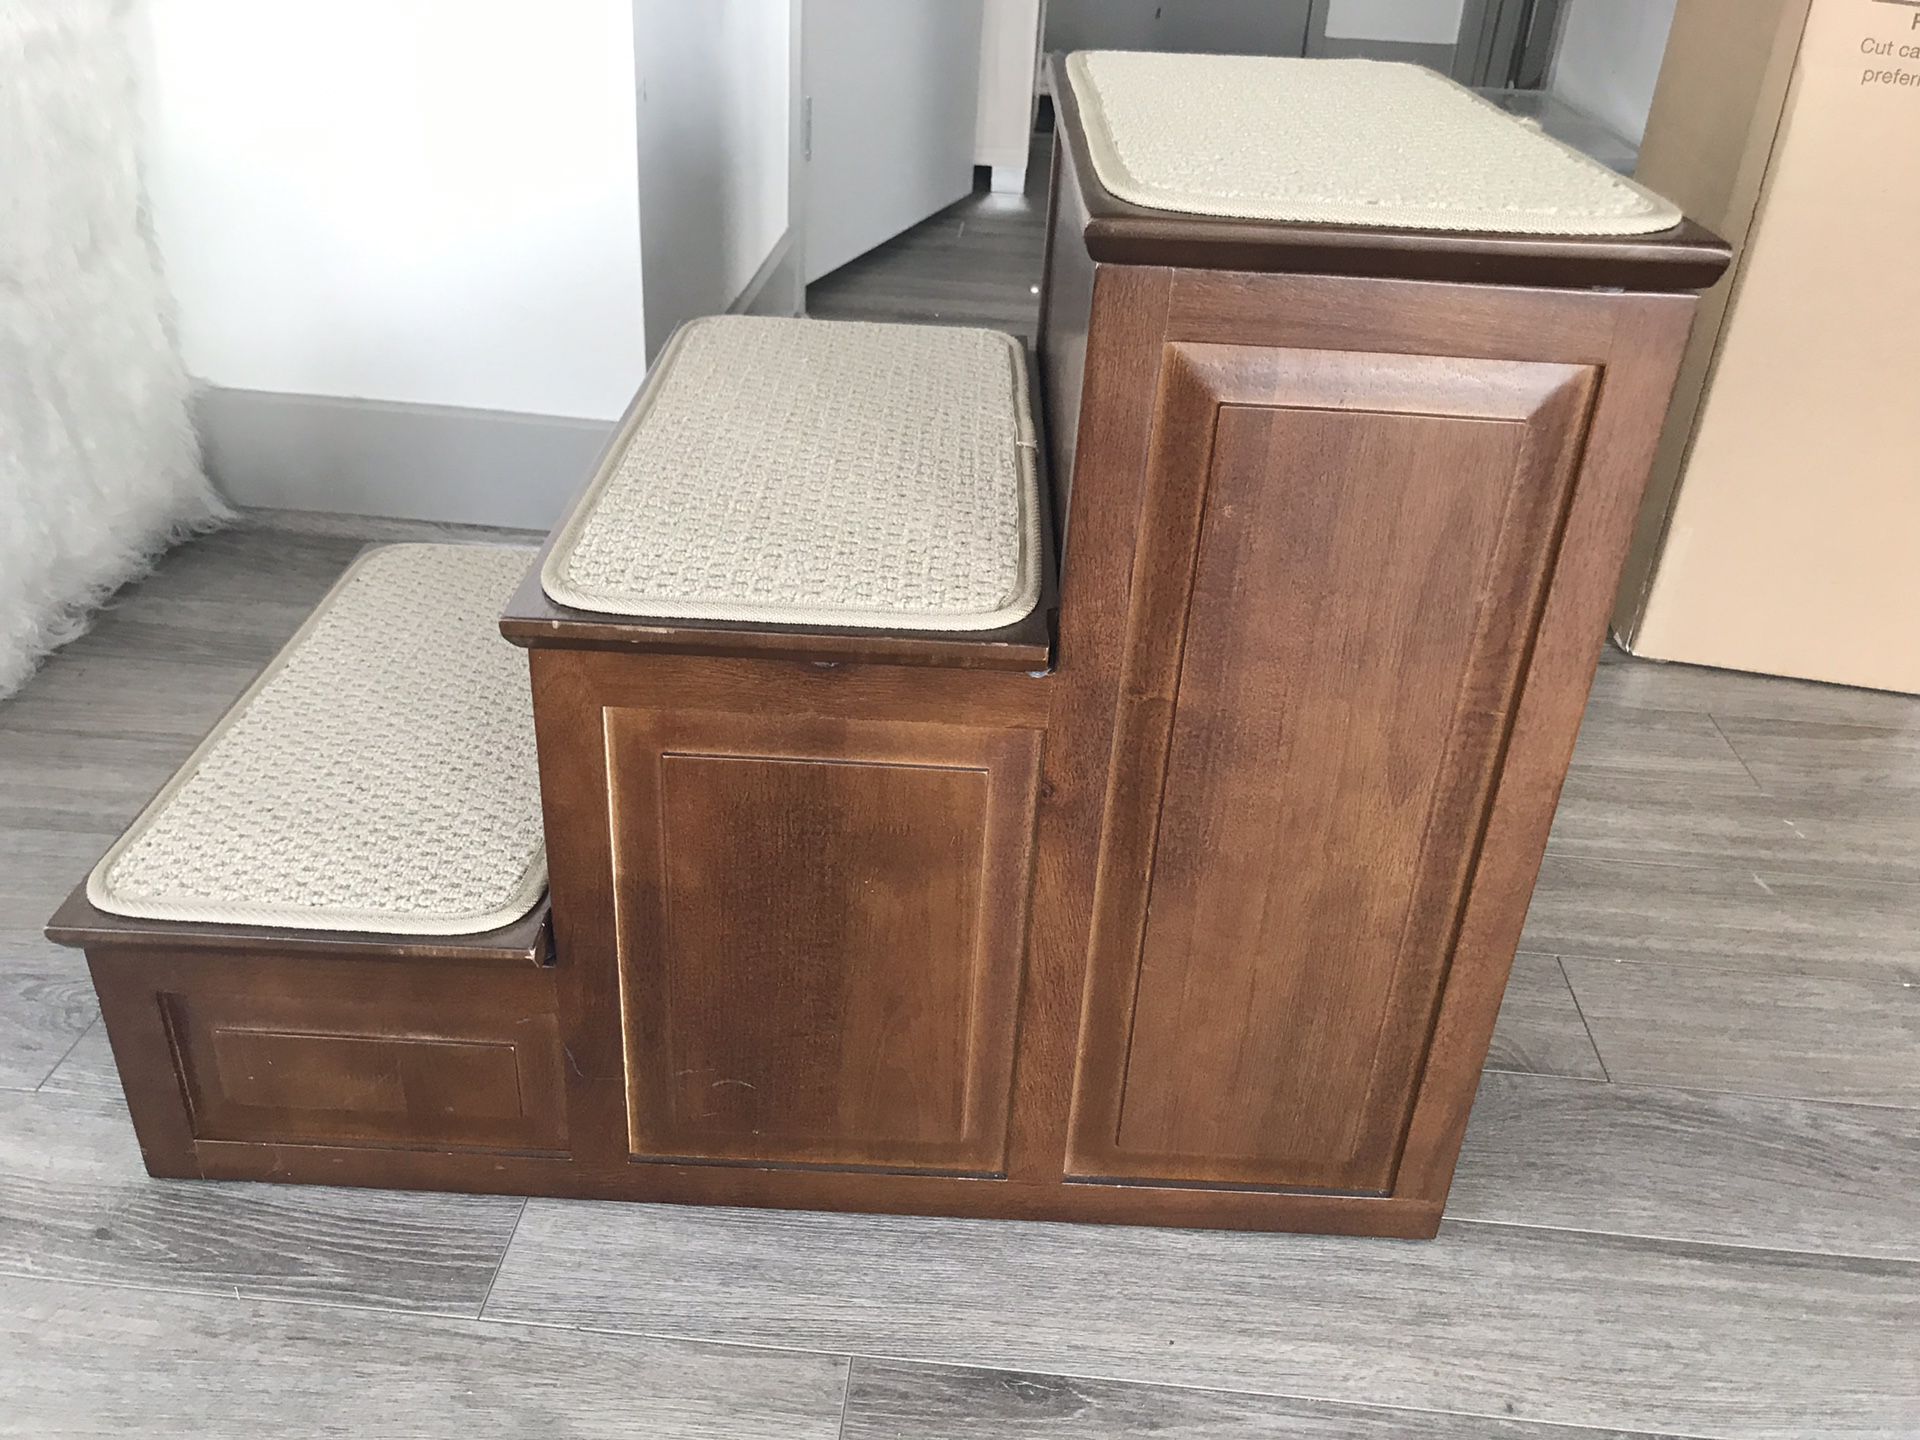 Pet steps and storage unit for sale